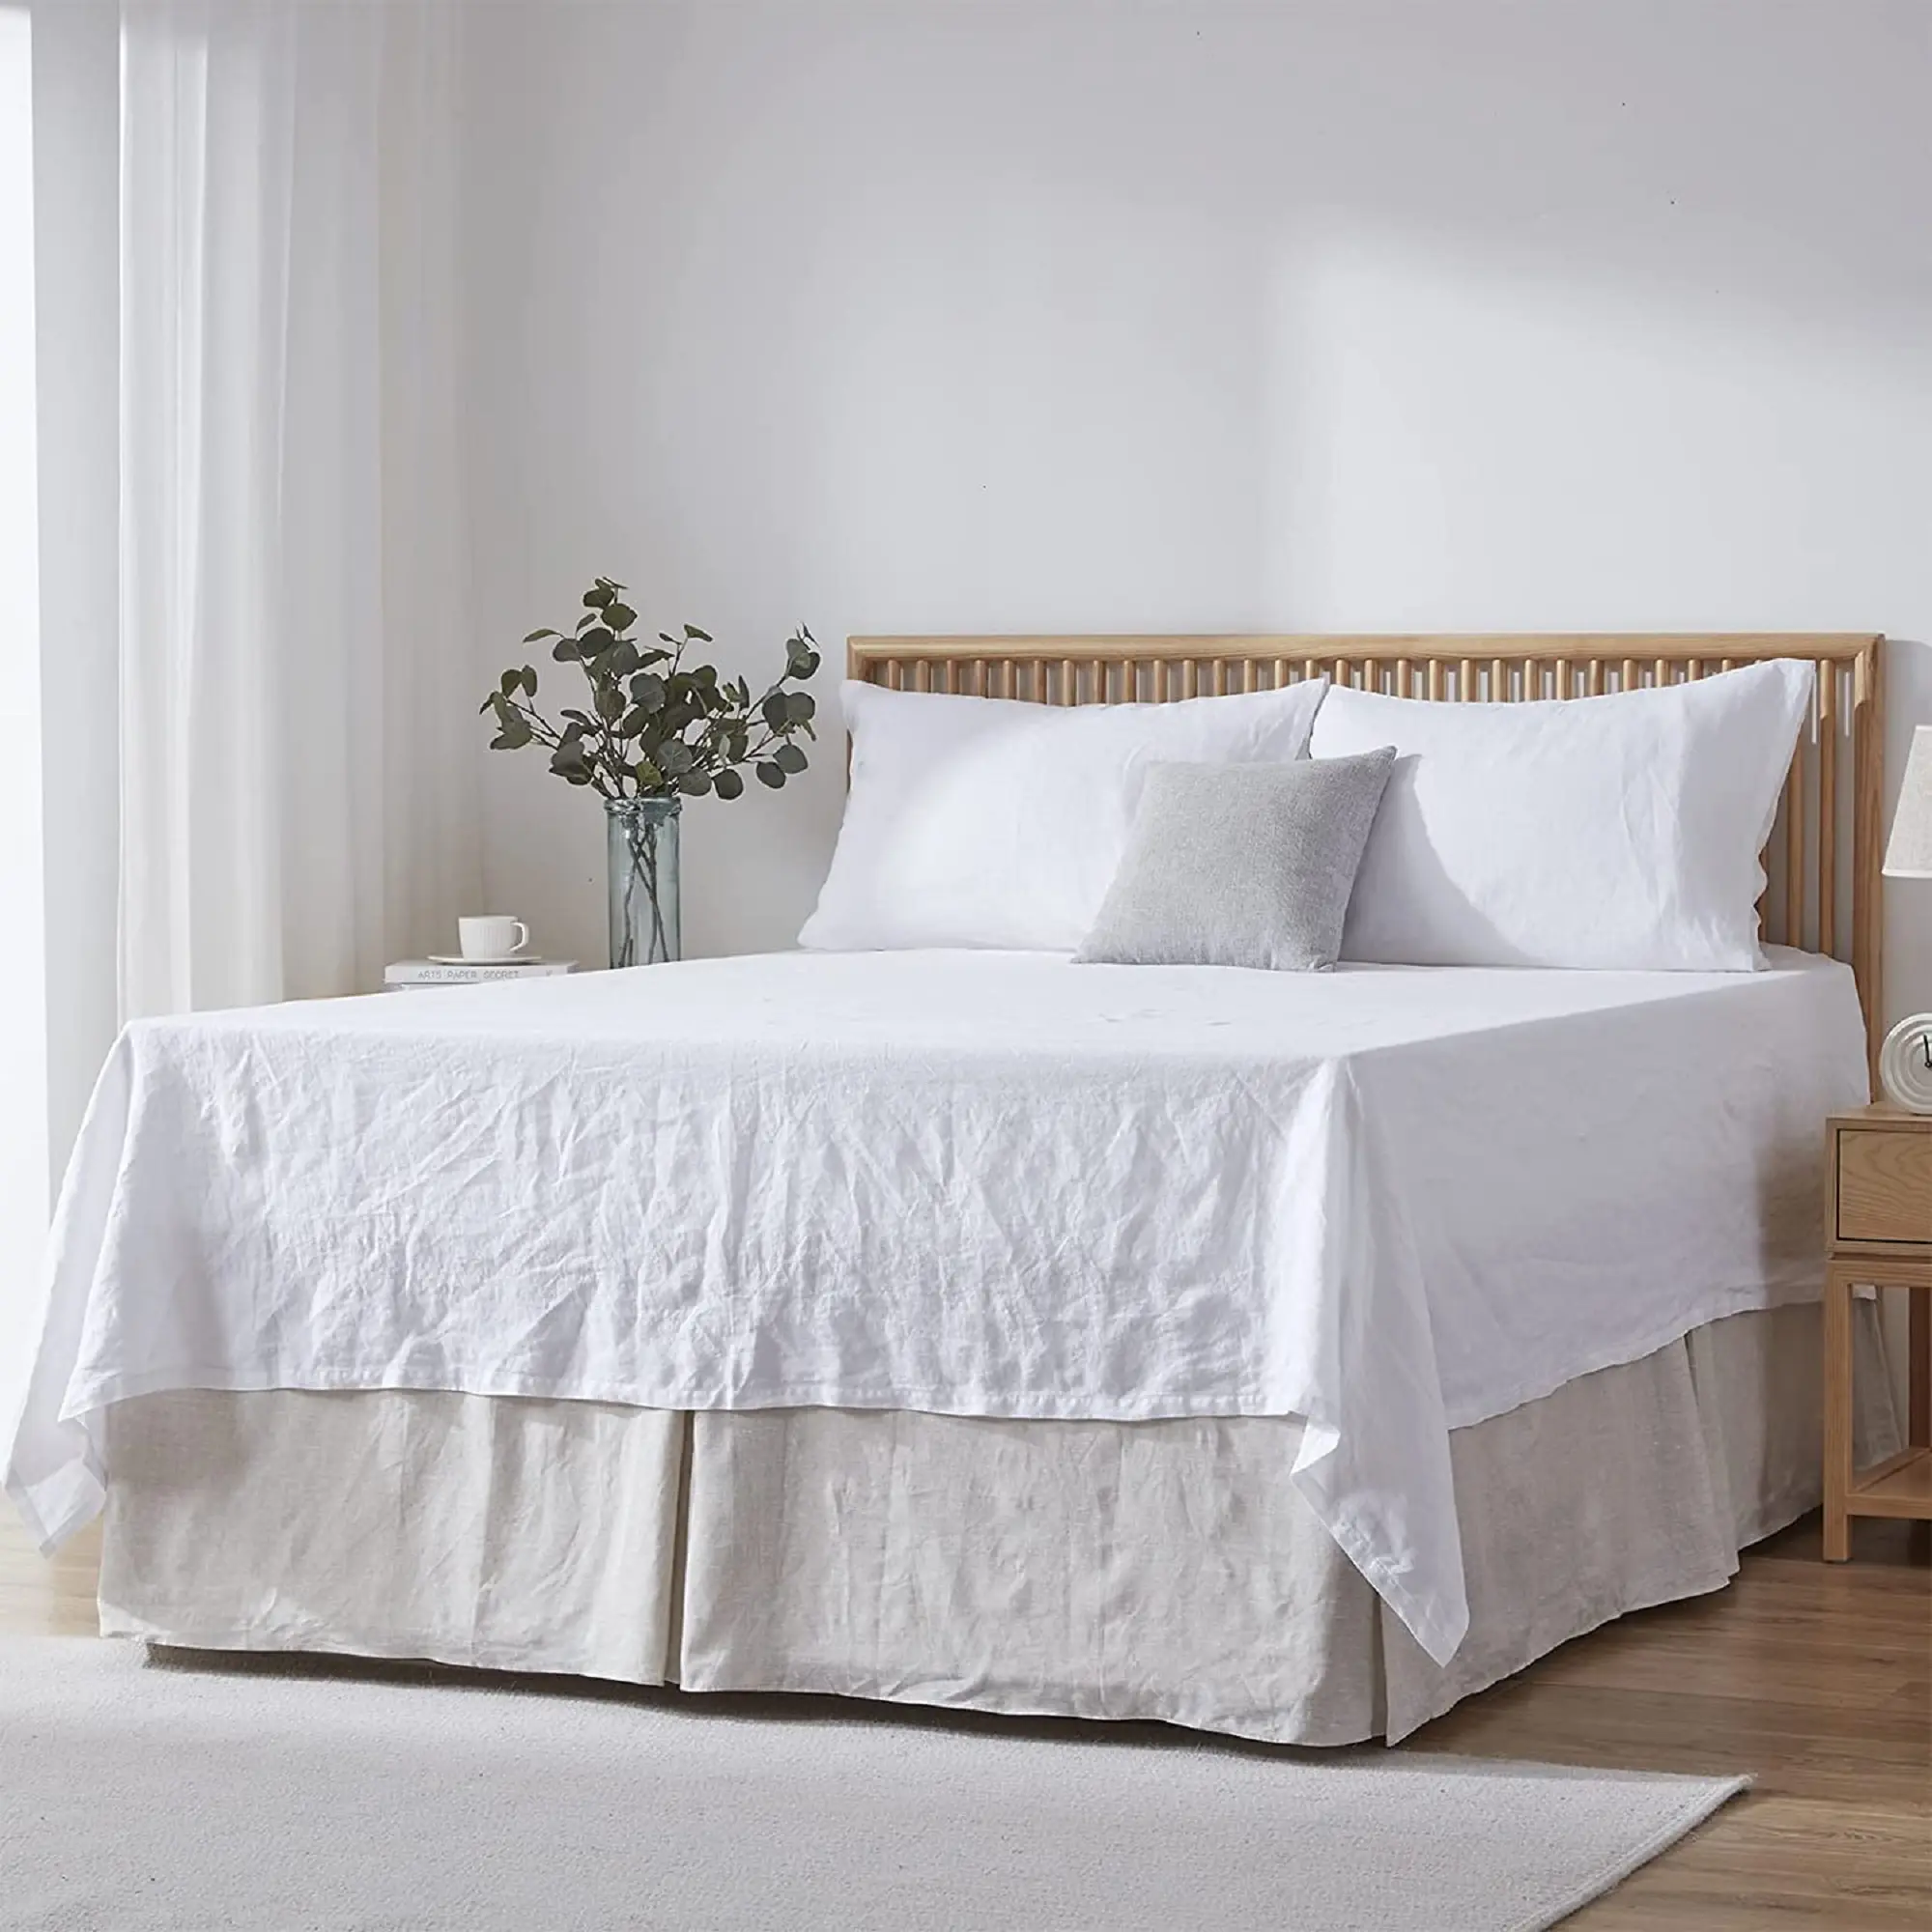 Nature 100% Pure Cotton Bed Skirt High quality Nature 100 Pure Cotton Bed Skirt For Hotel Use in many colors